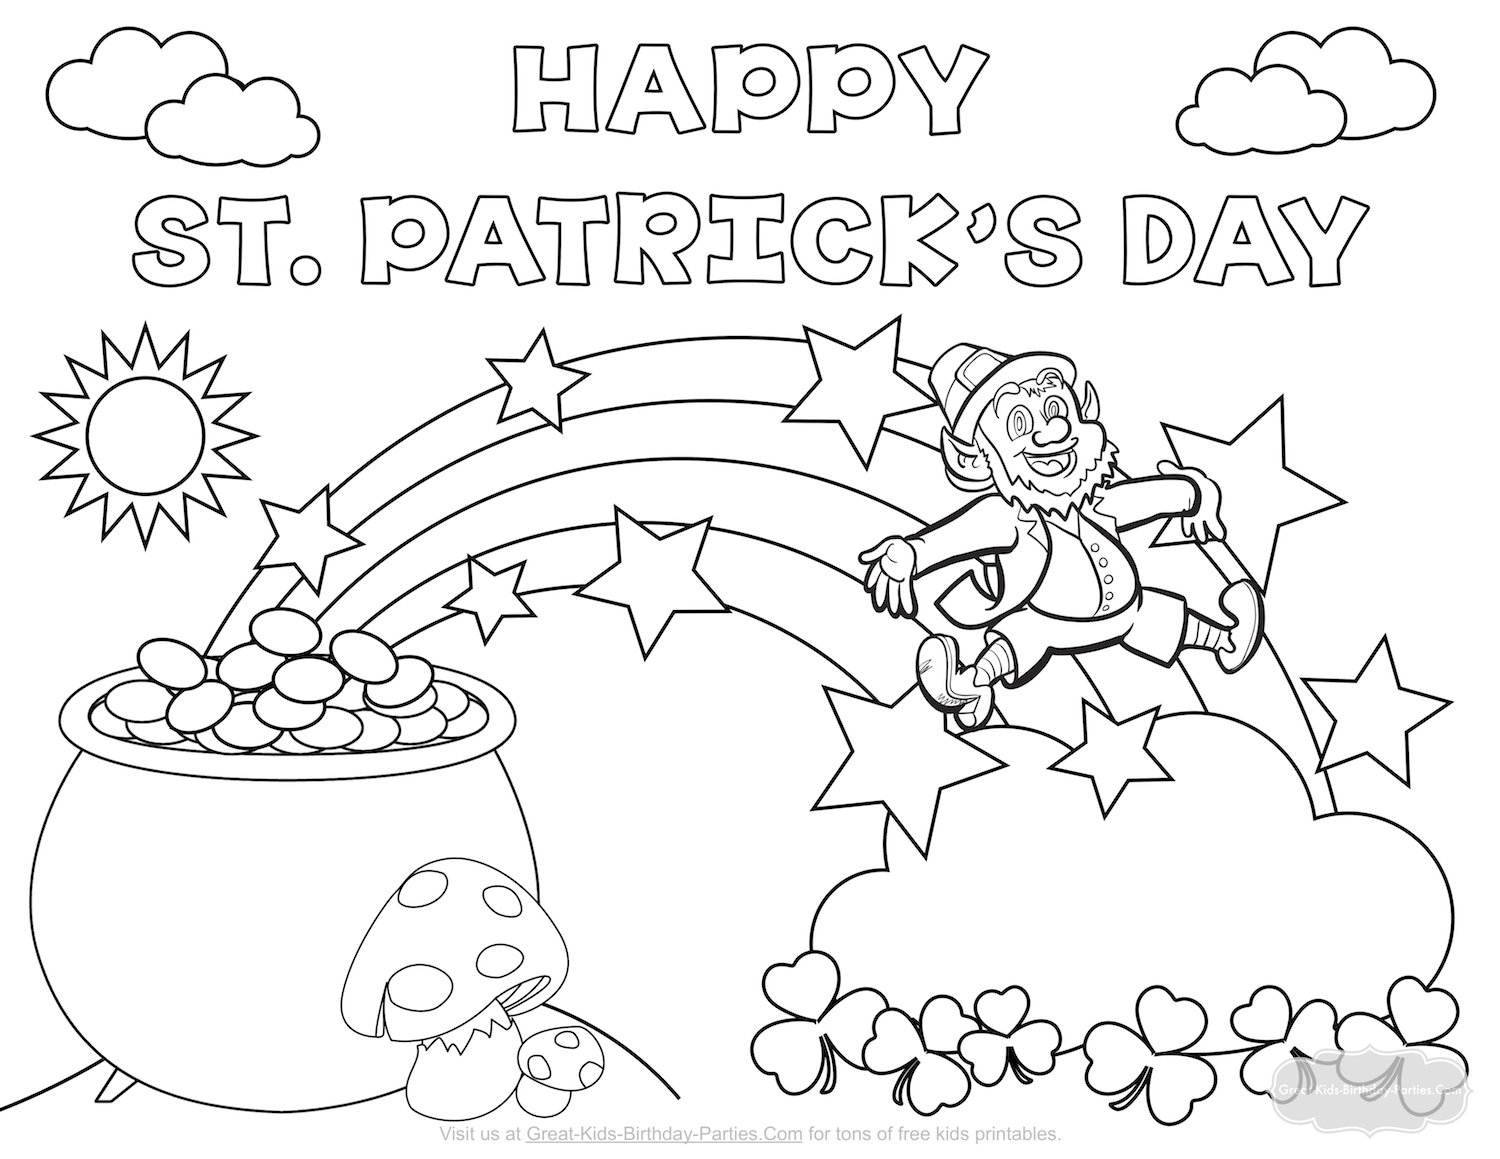 Coloring Pages : Free Coloring Sheets For Kids St Patricks Day - Free Printable Saint Patrick Coloring Pages